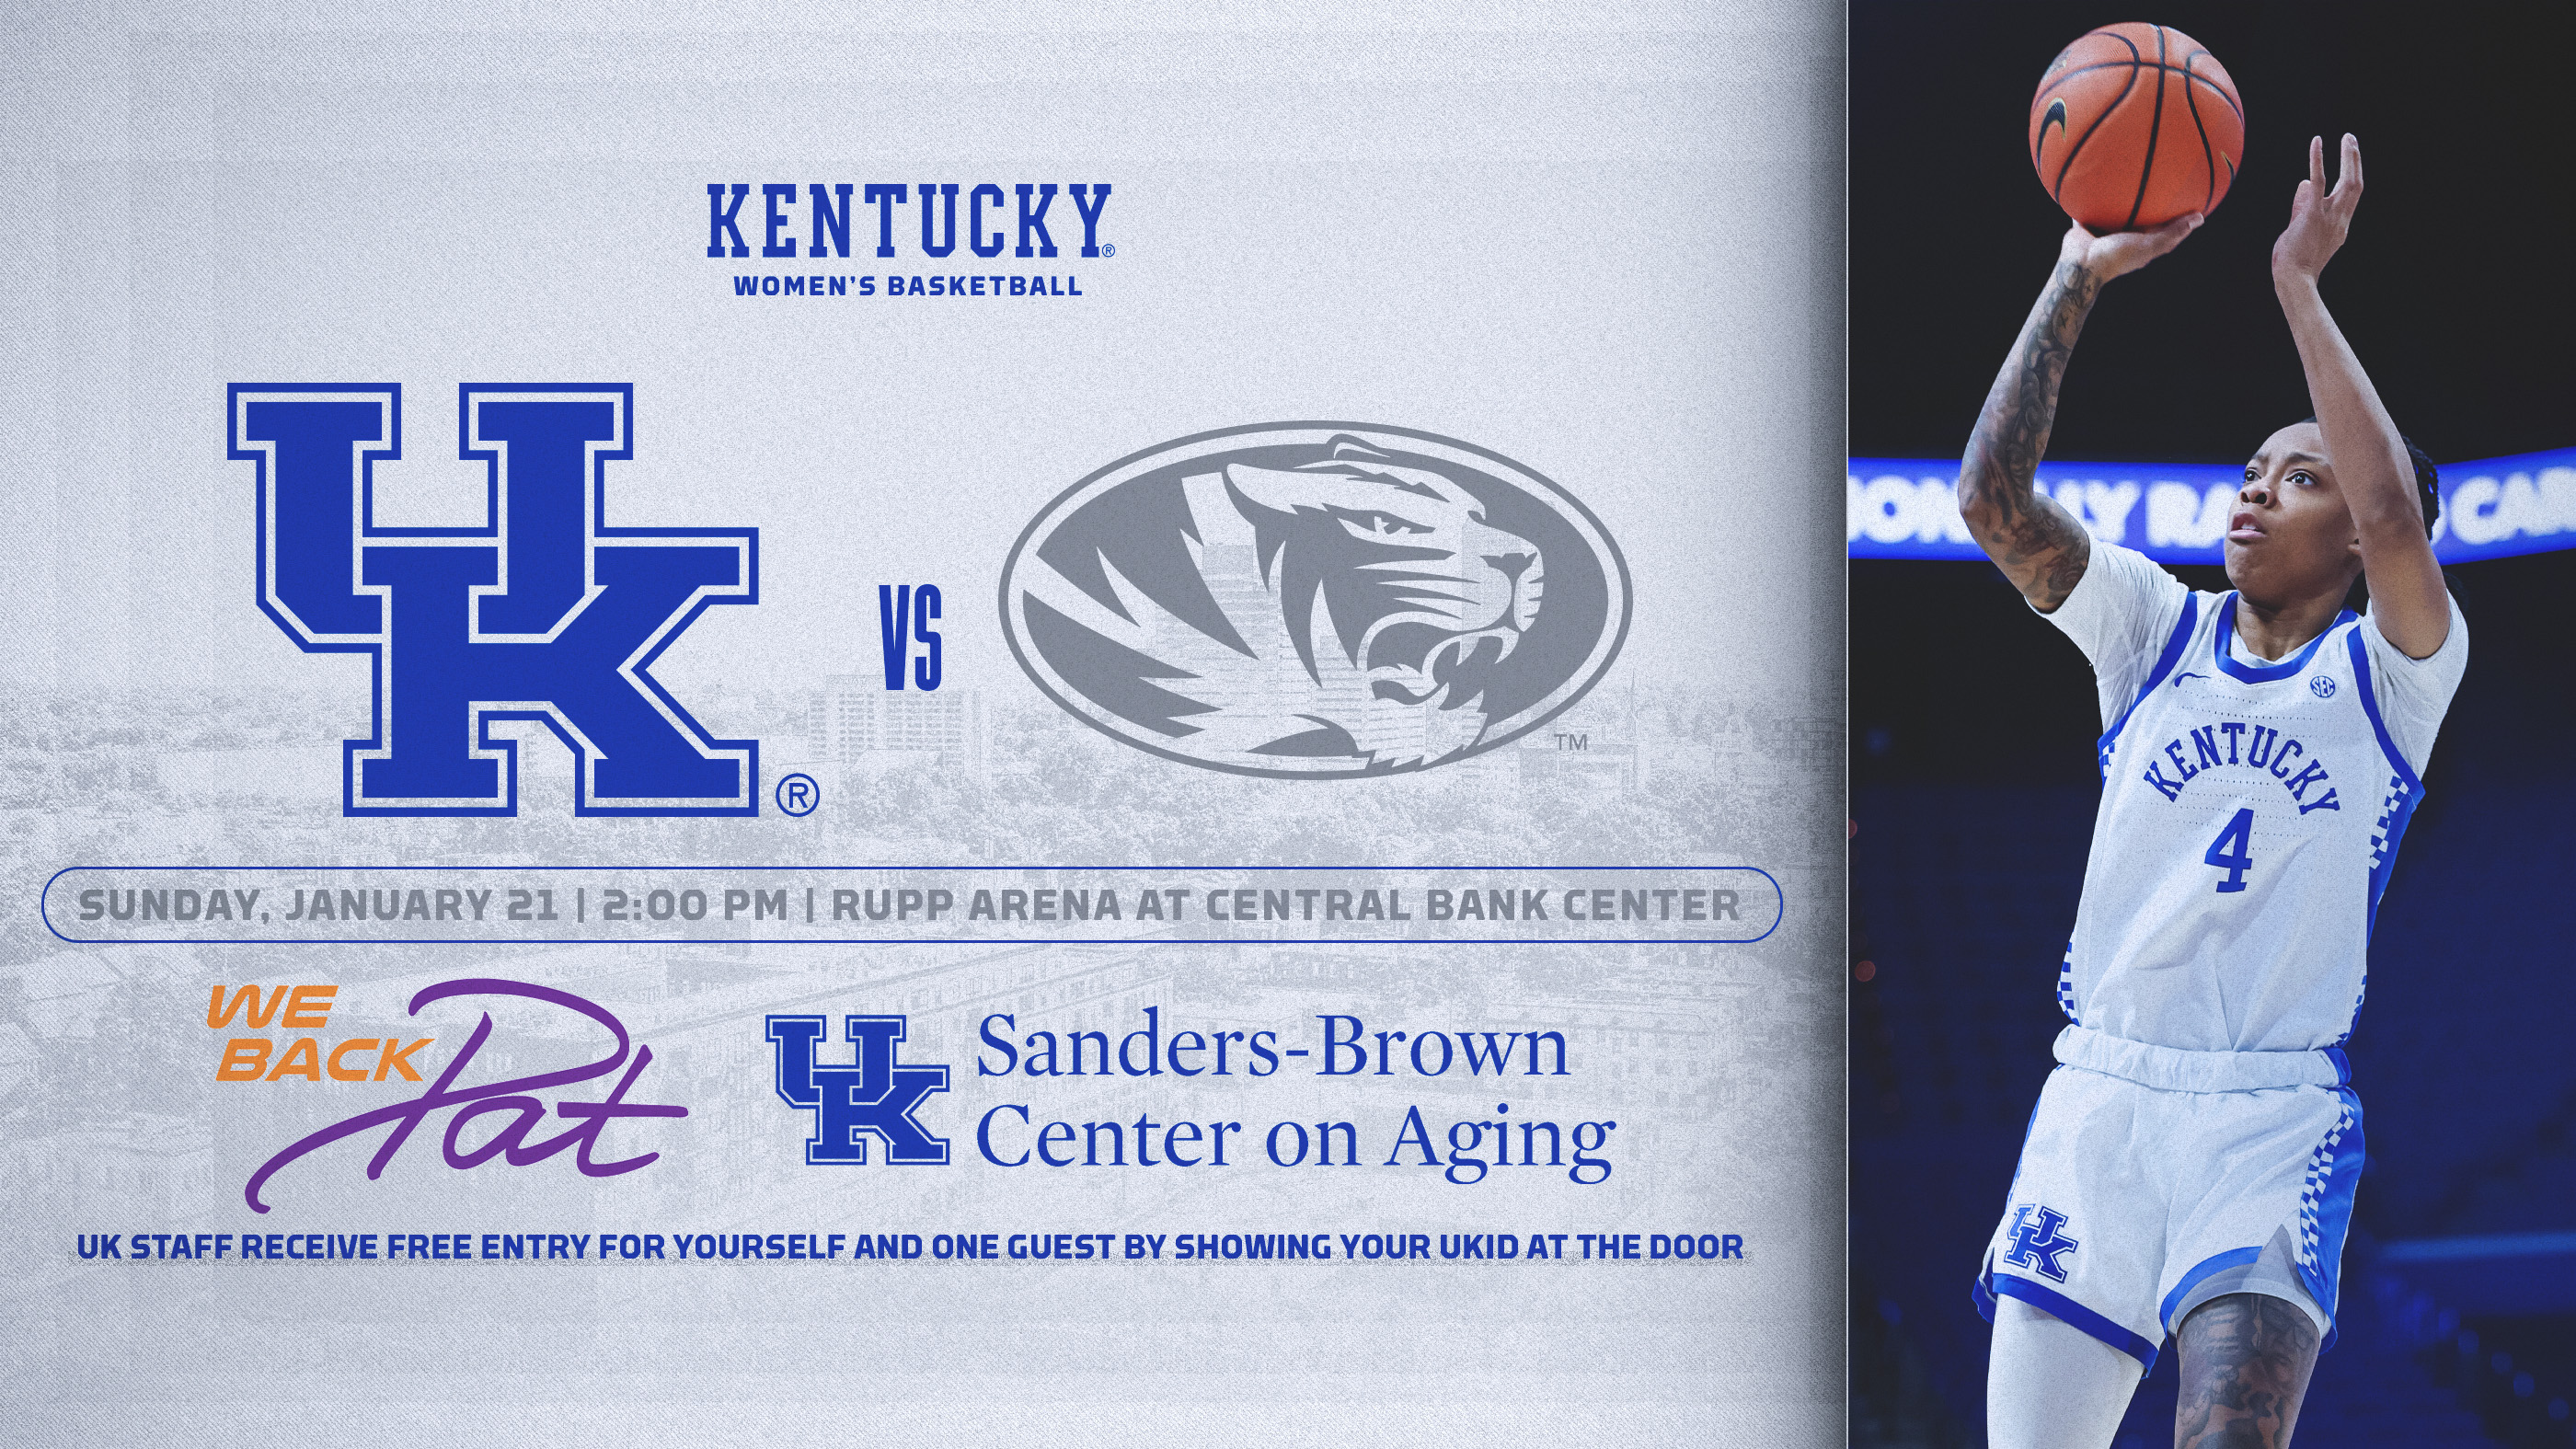 We Back Pat UK Women's Basketball Game flyer. UK Wildcats vs Missouri Tigers January 21 2pm Rupp Arena at Central Bank Center UK Staff receive free entry for yourself and one guest by showing your UK ID at the door